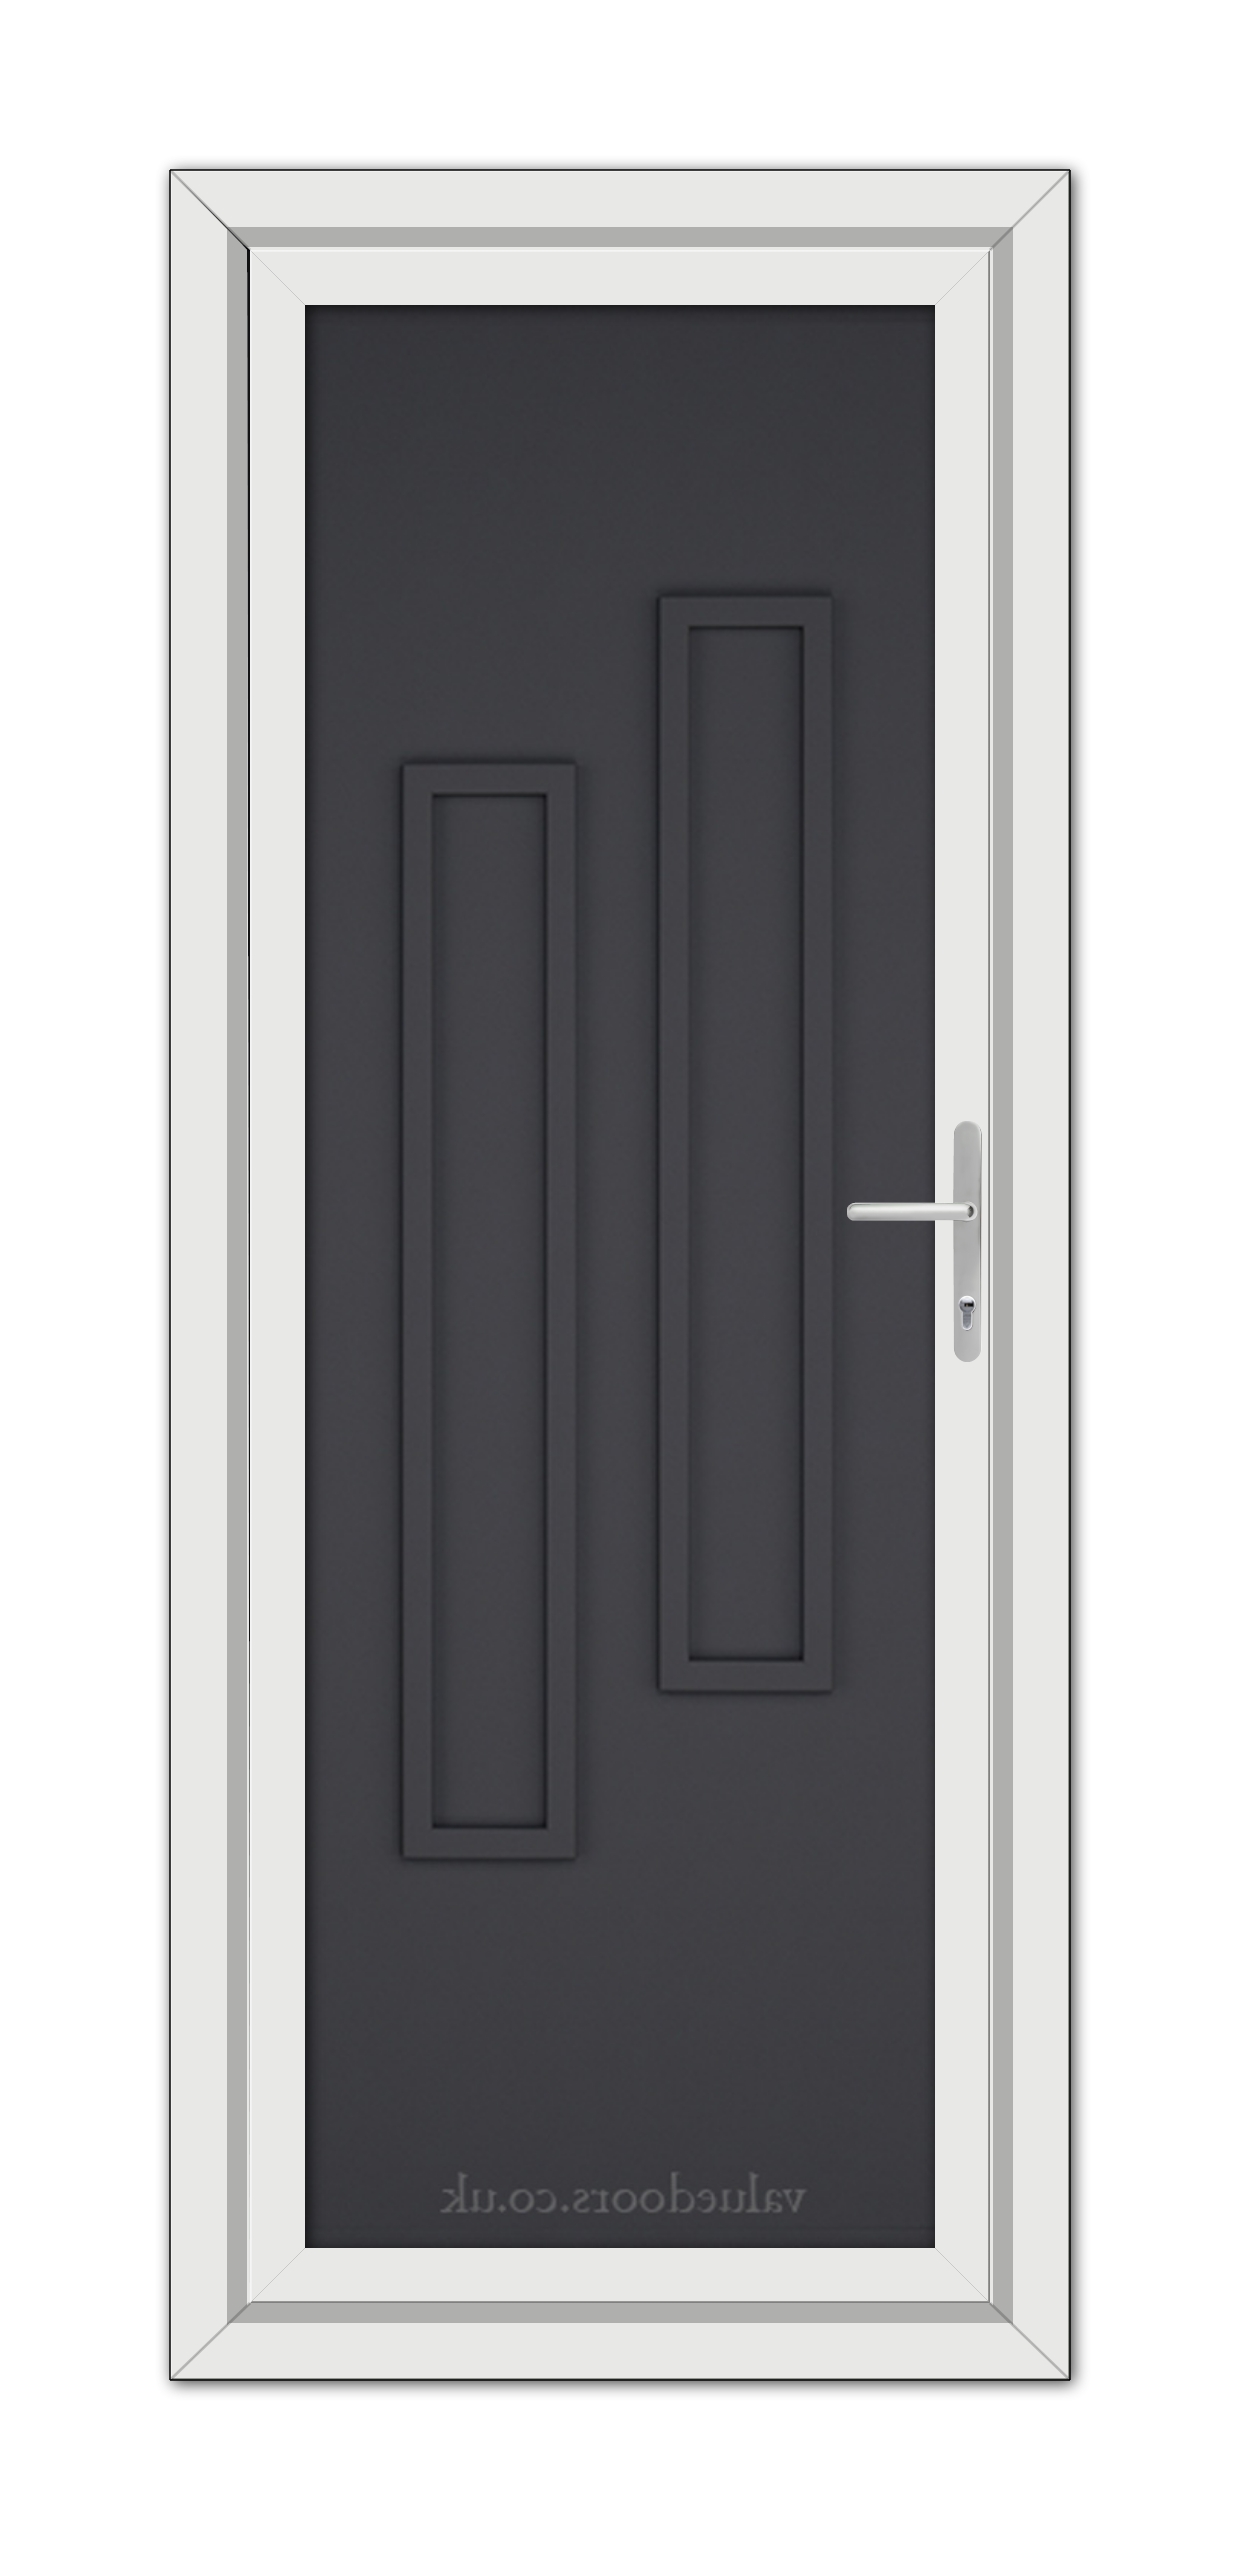 A Grey Modern 5082 Solid uPVC Door with a white frame and a metallic handle, featuring two vertical panels.